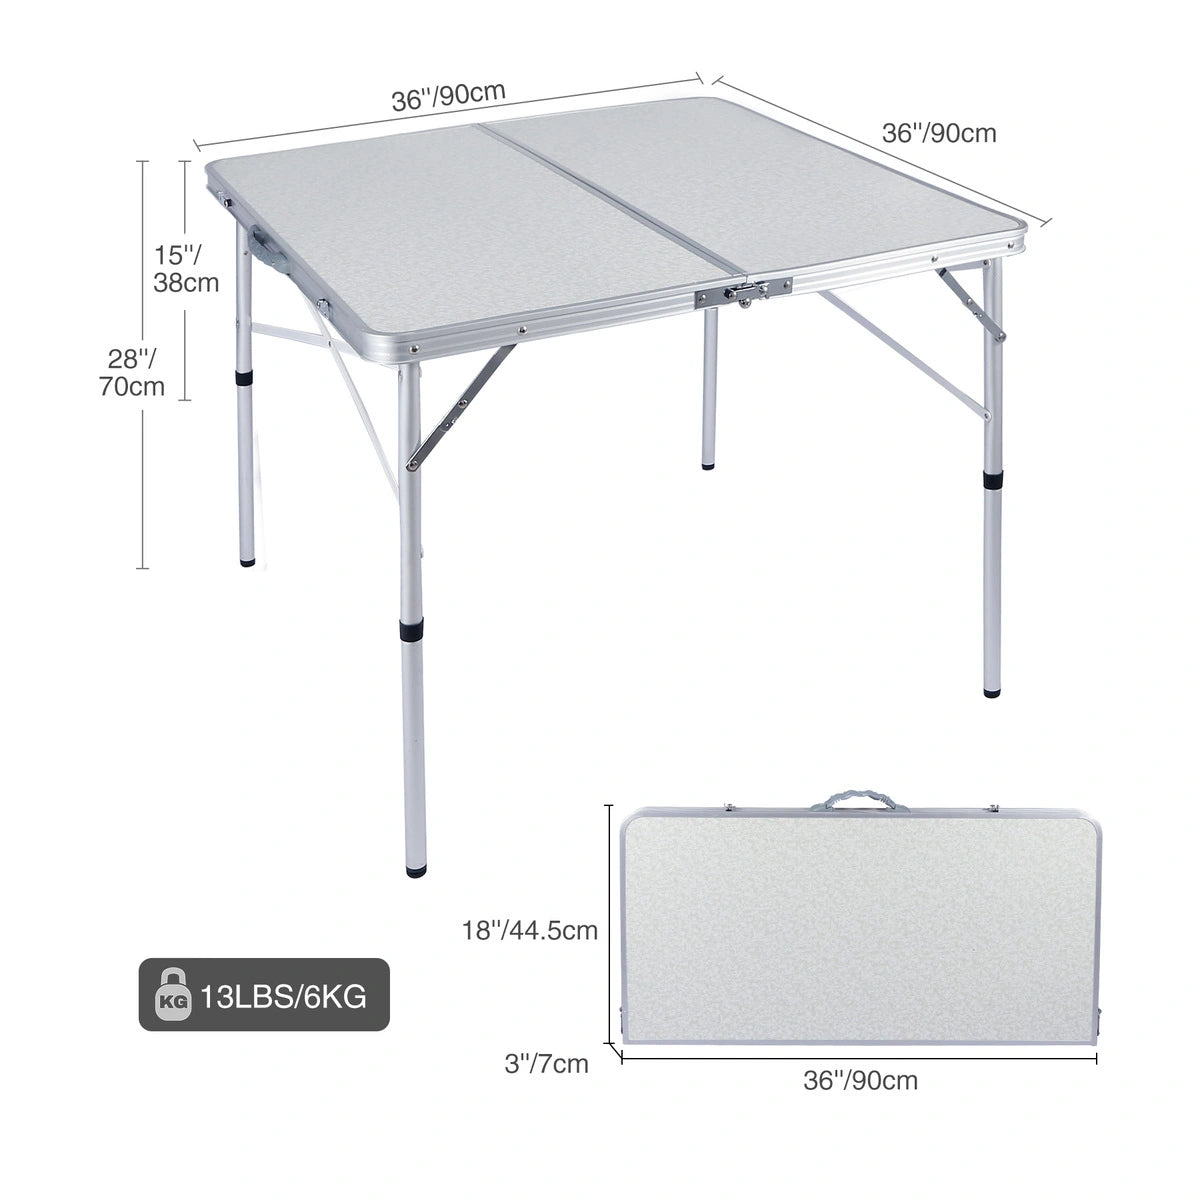 Small Folding Camping Table Adjustable Height